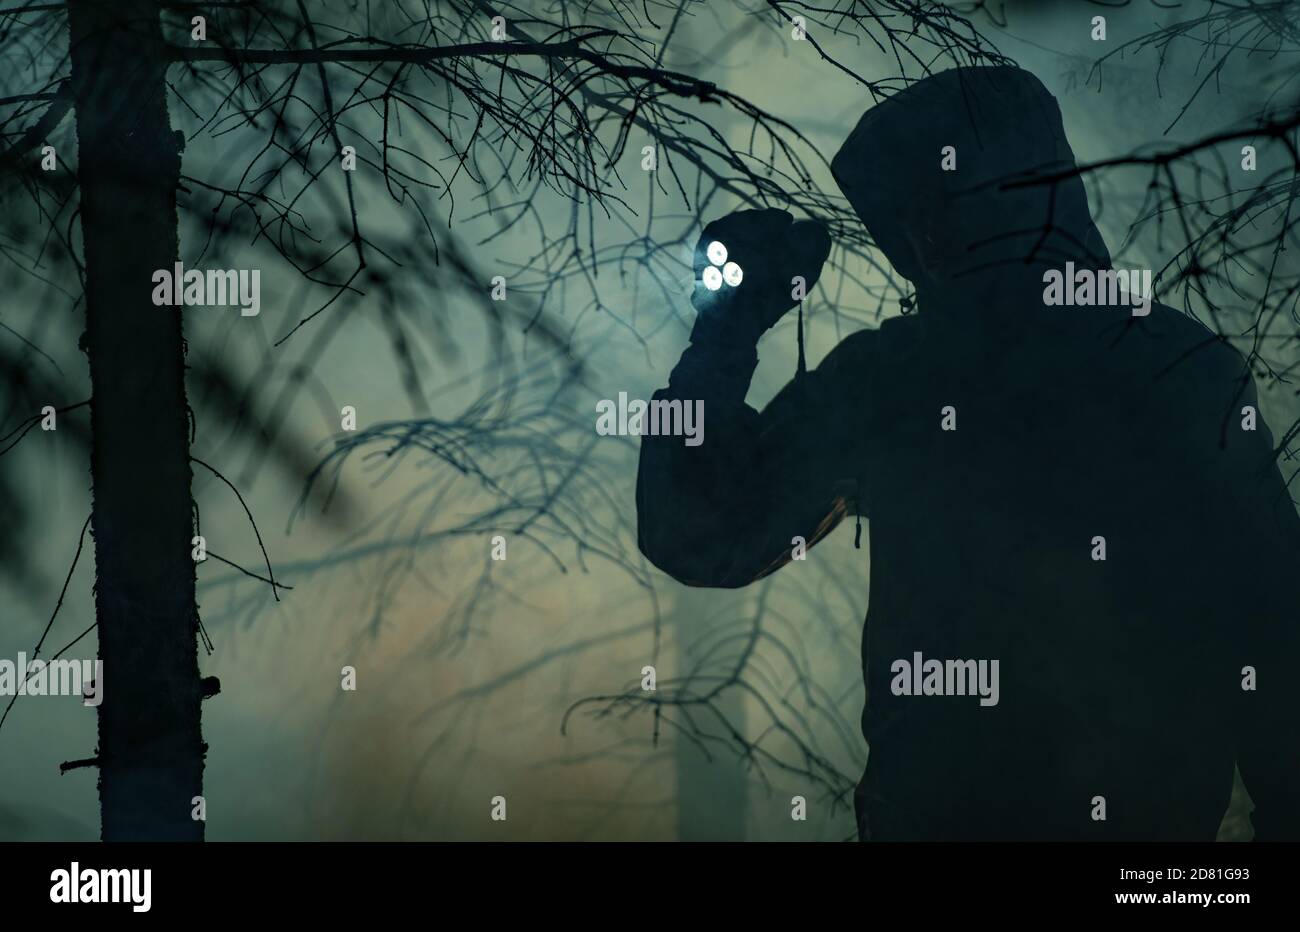 Men in his 40s with Flashlight Inside Dark Foggy Forest at Night. Performing Search During Night Hours. Missing People Theme. Stock Photo